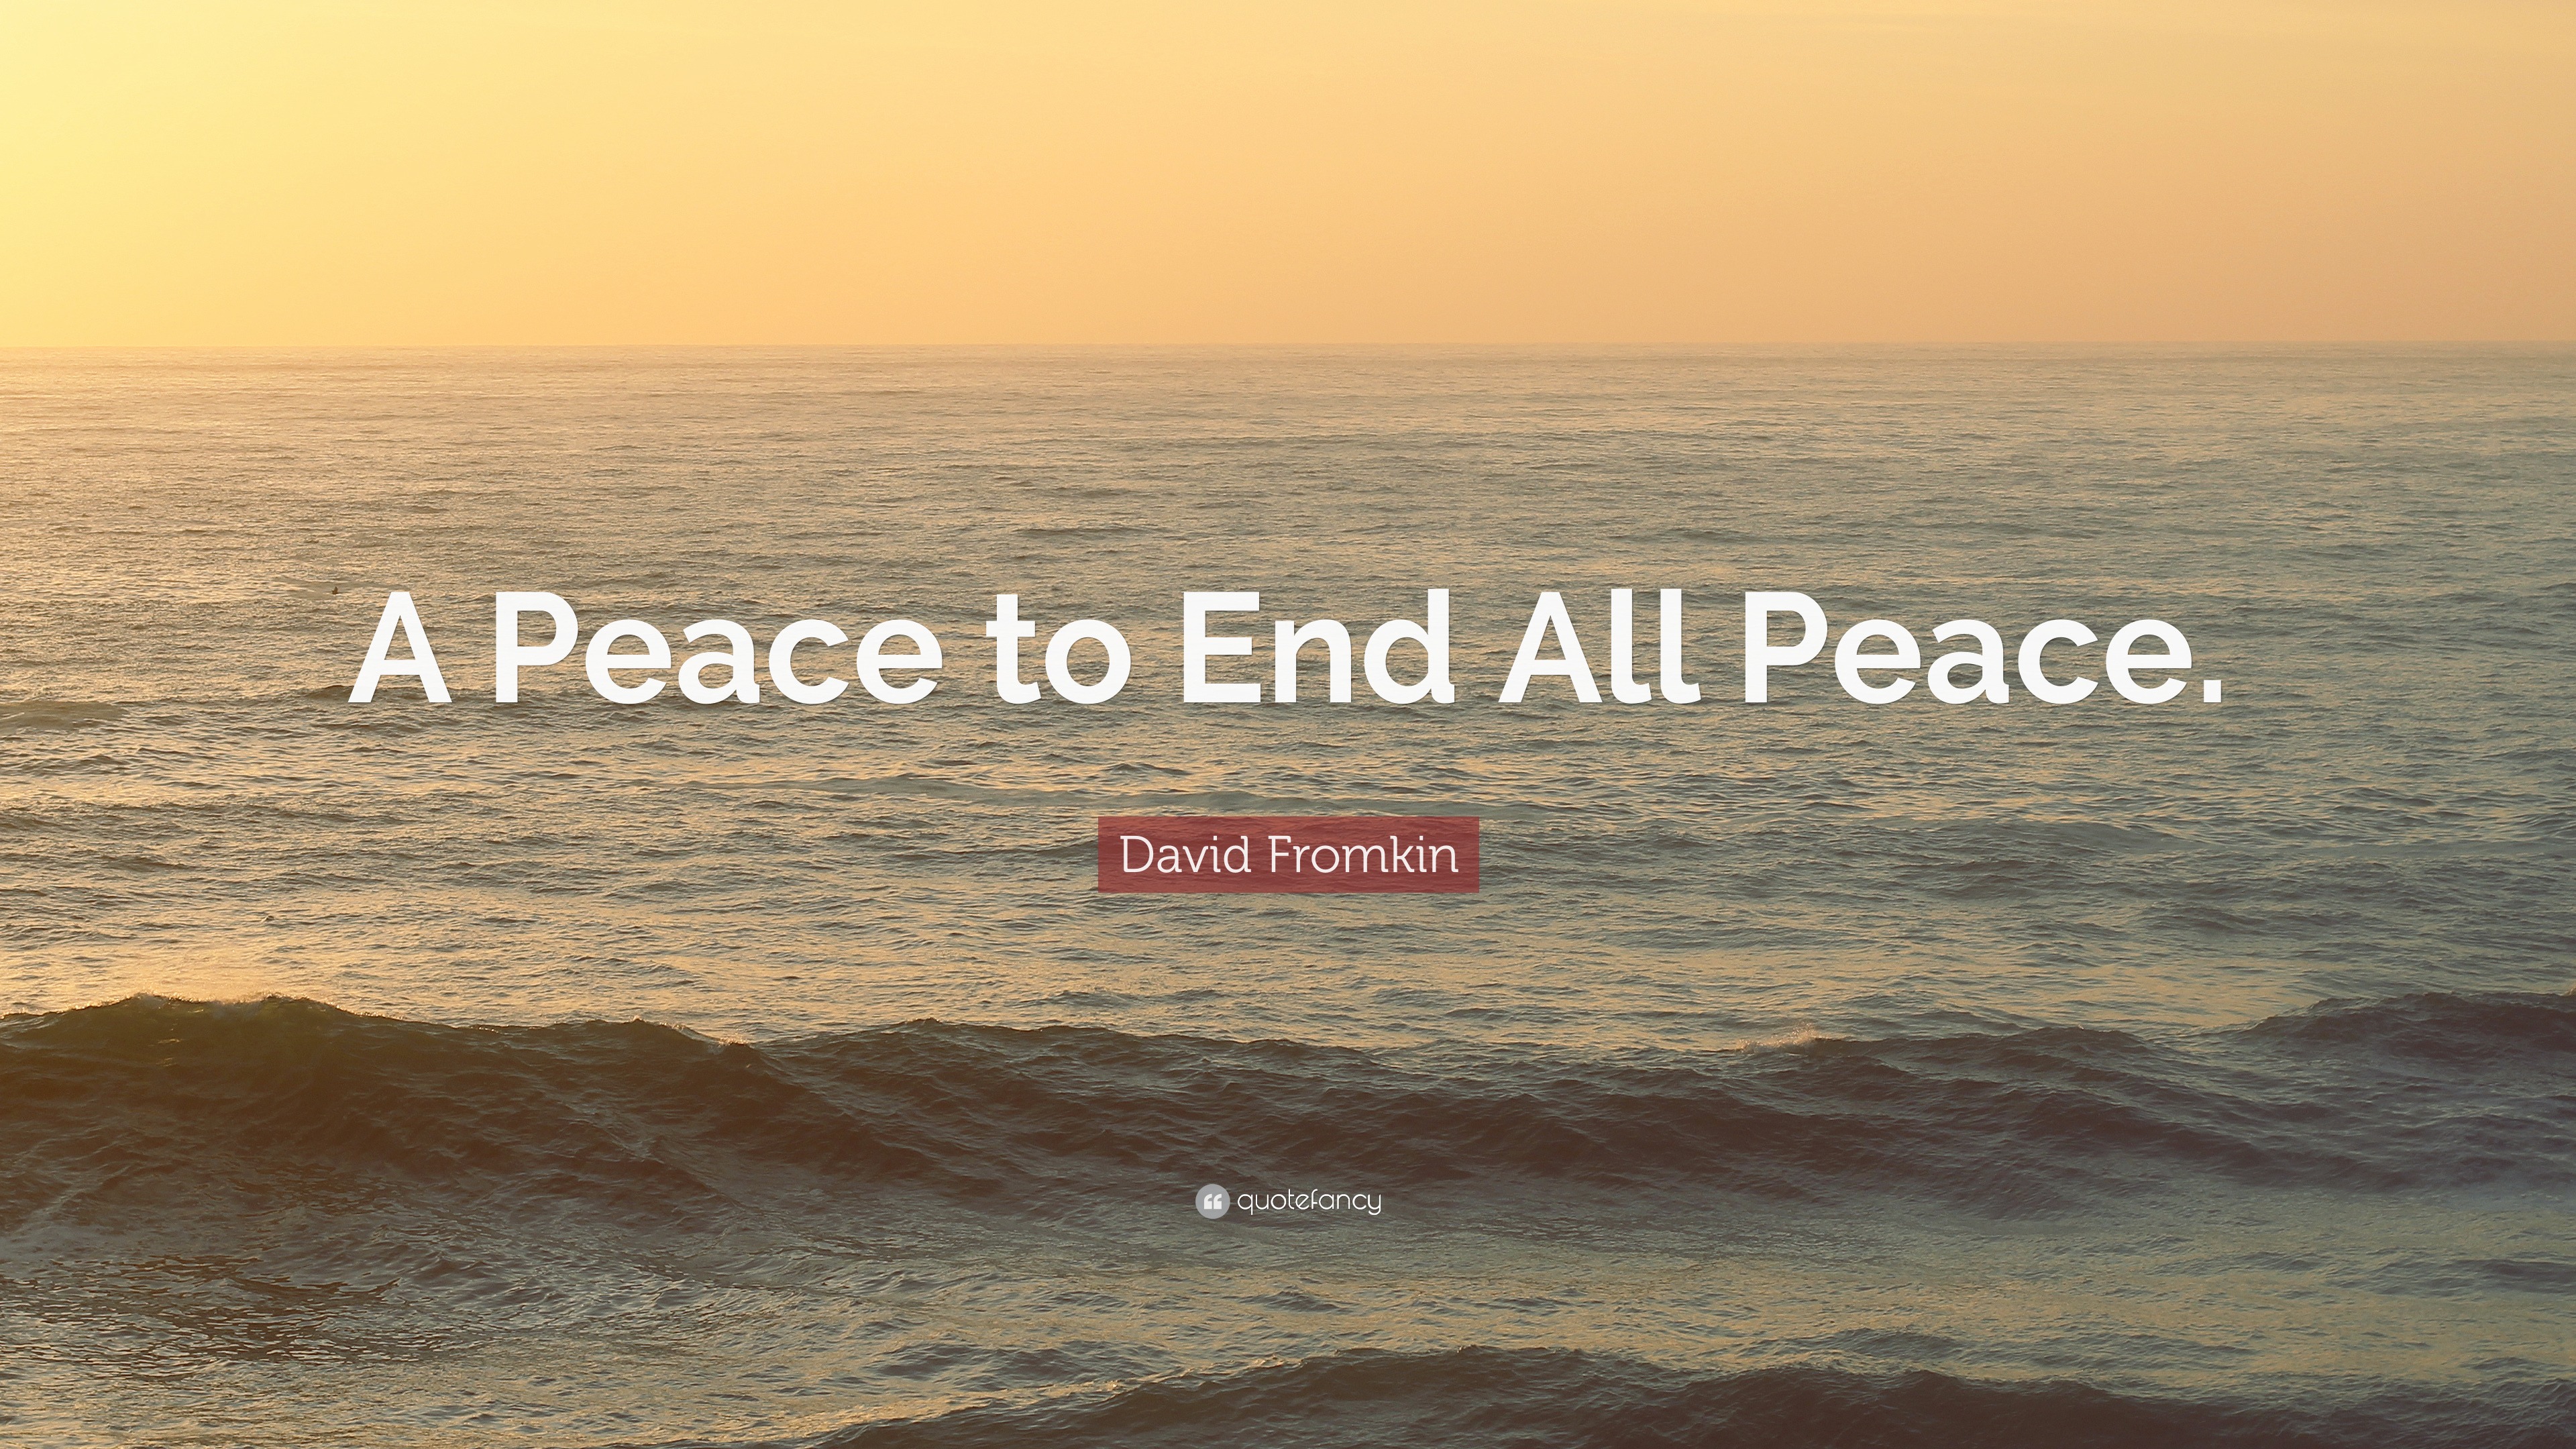 A Peace to End All Peace by David Fromkin